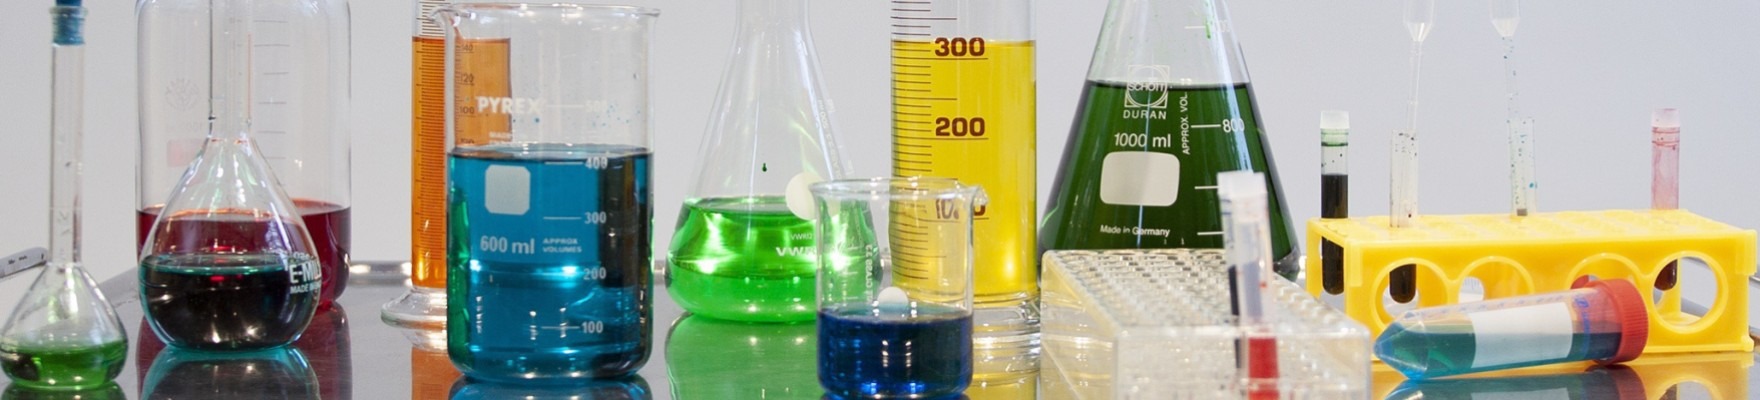 Close up of chemistry lab test tubes and bottles